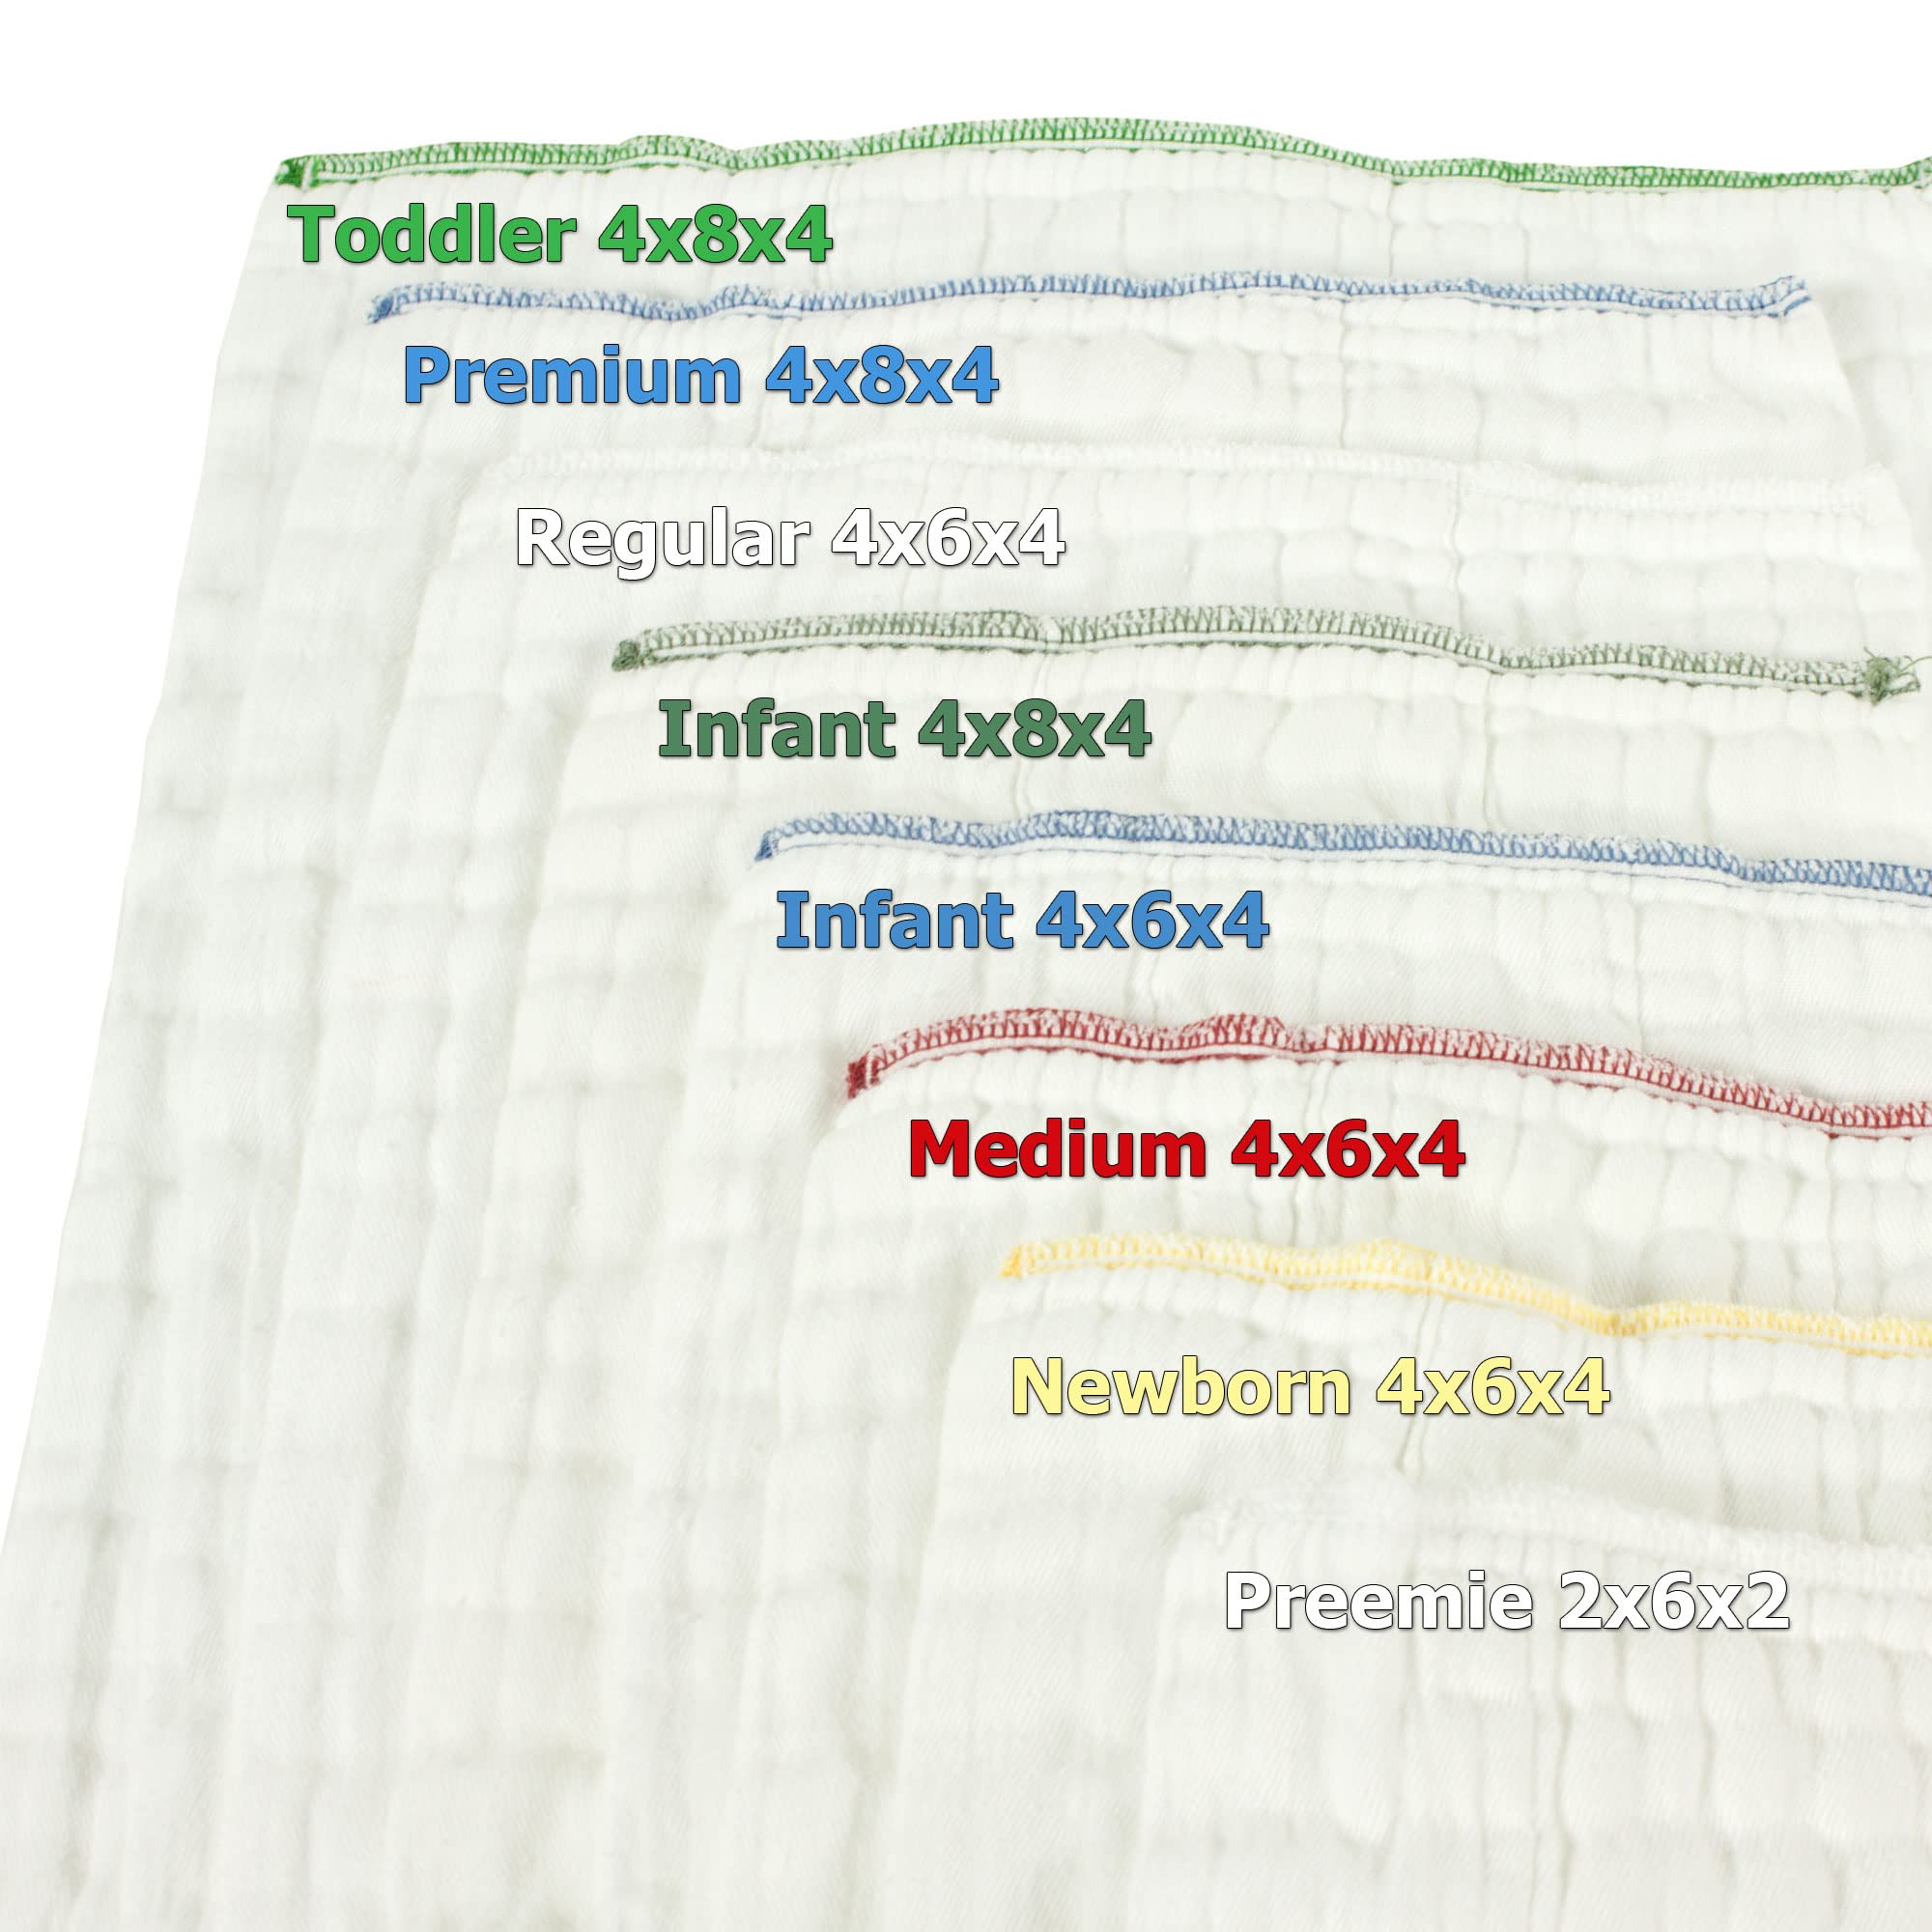 OsoCozy - Indian Cotton Prefolds (Dozen) - Soft and Absorbent Baby Diapers Made of 100% Indian Cotton - 9.5